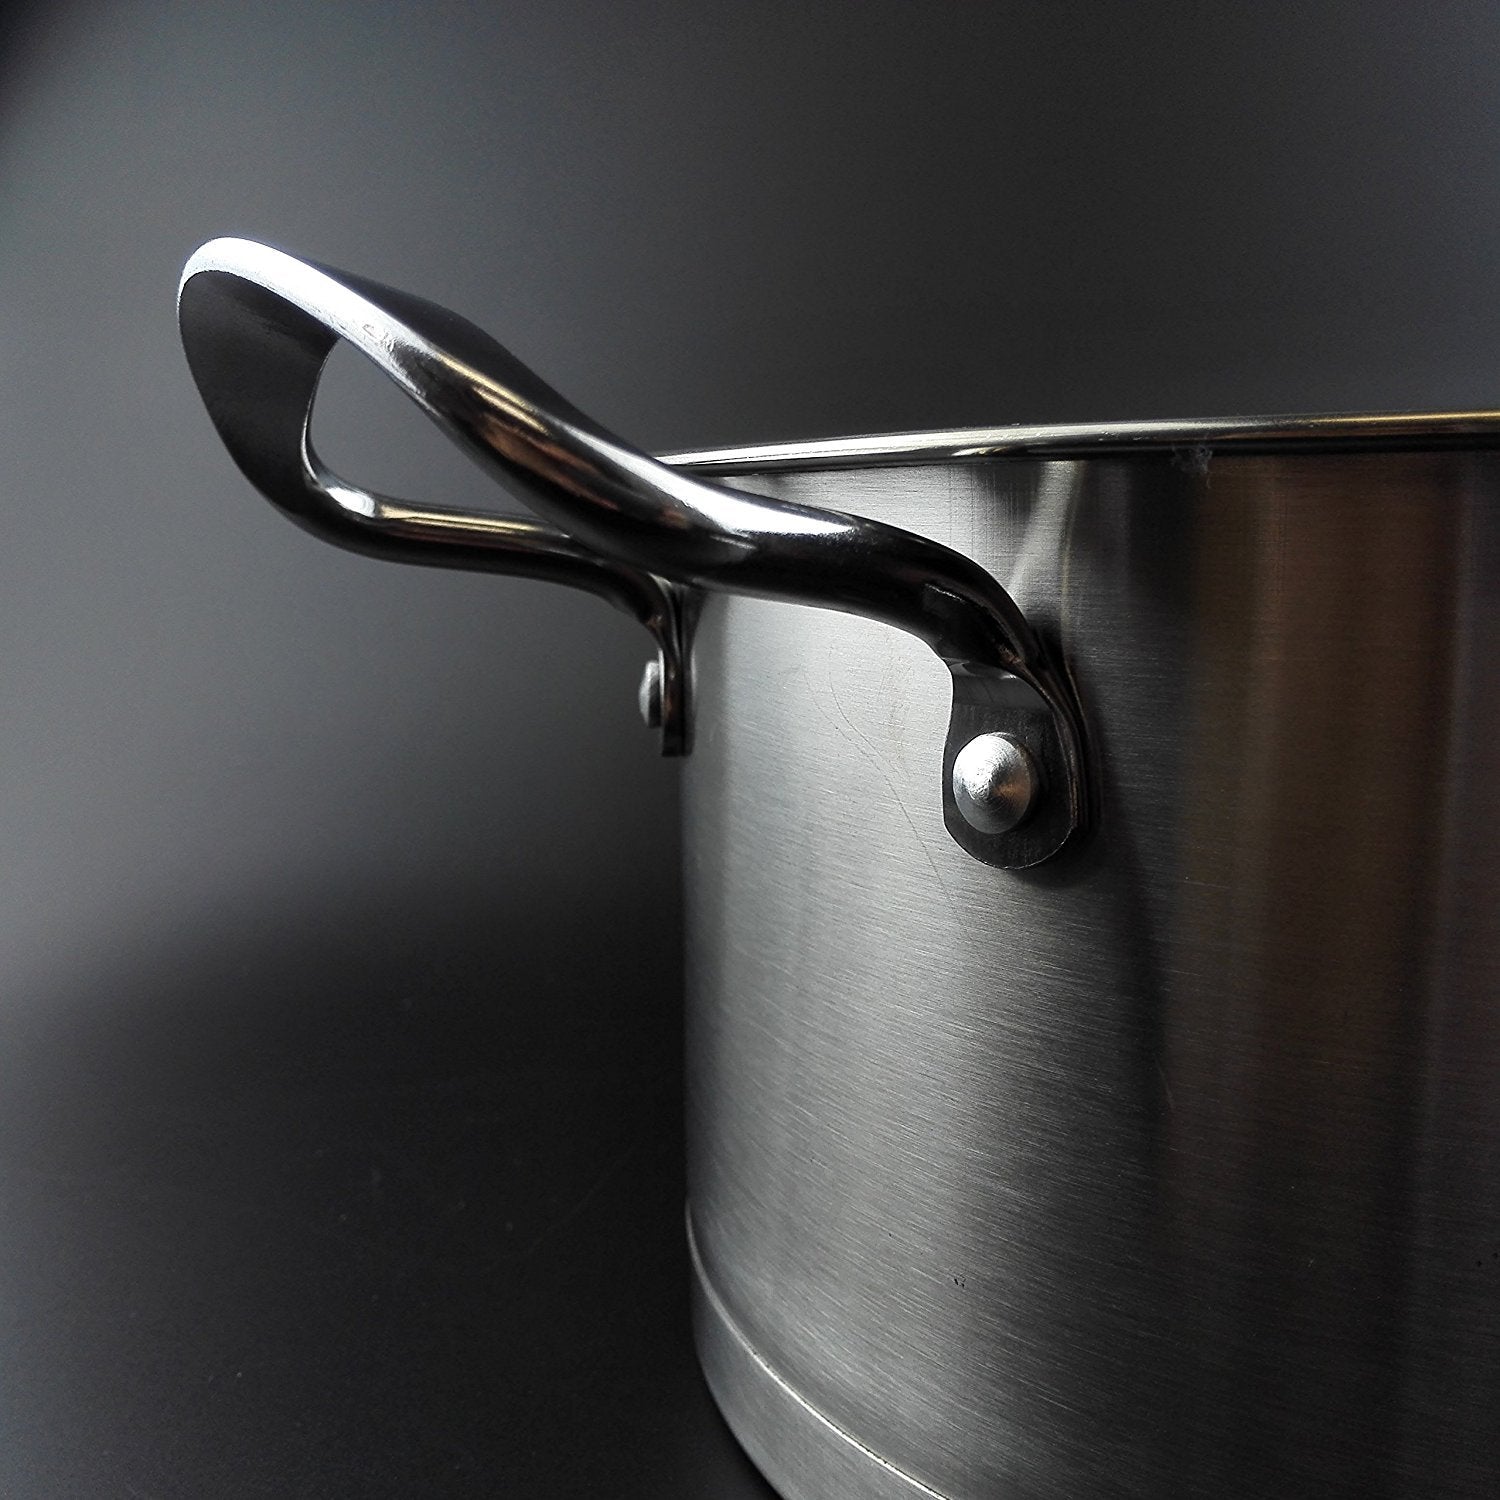 Big Sale-Topoko Stainless Steel 4-quart Saucepot - Perfect Family Soup Pot  with Tempered Glass Lid Cooking Pot Cookware